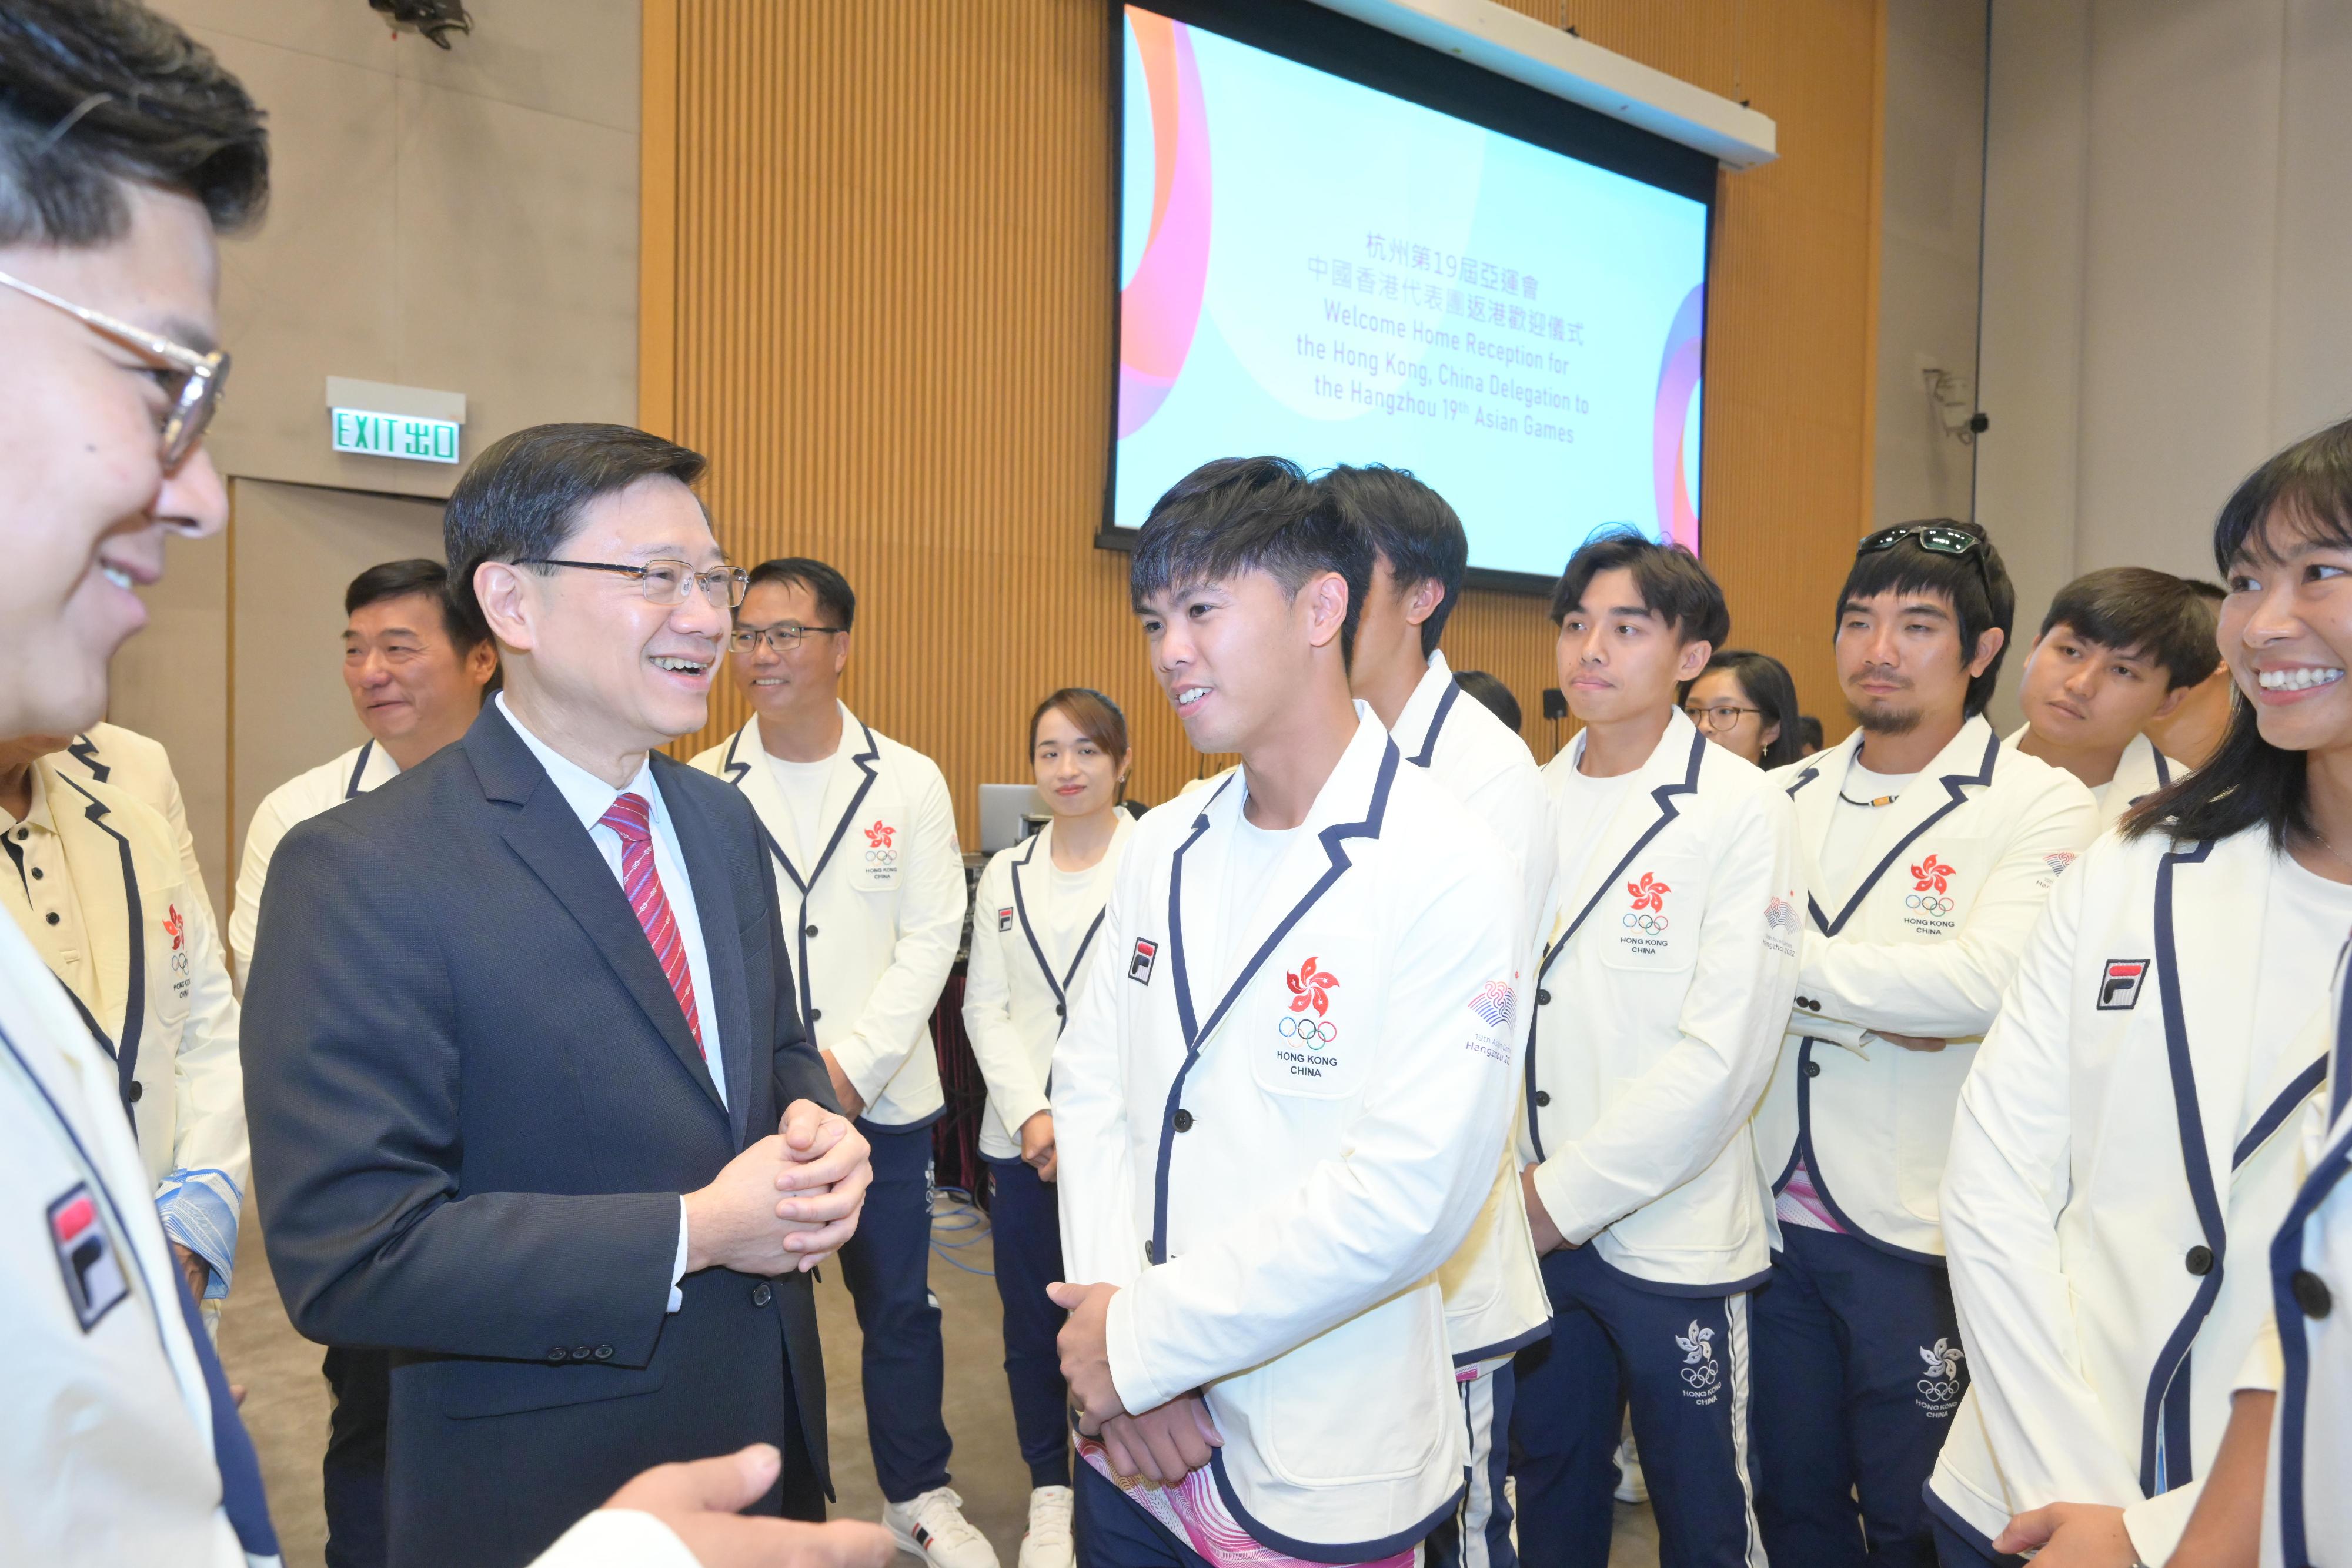 The Chief Executive, Mr John Lee, attended the welcome home reception for the Hong Kong, China Delegation to the 19th Asian Games Hangzhou today (October 14). Photo shows Mr Lee (second left) interacting with athletes.